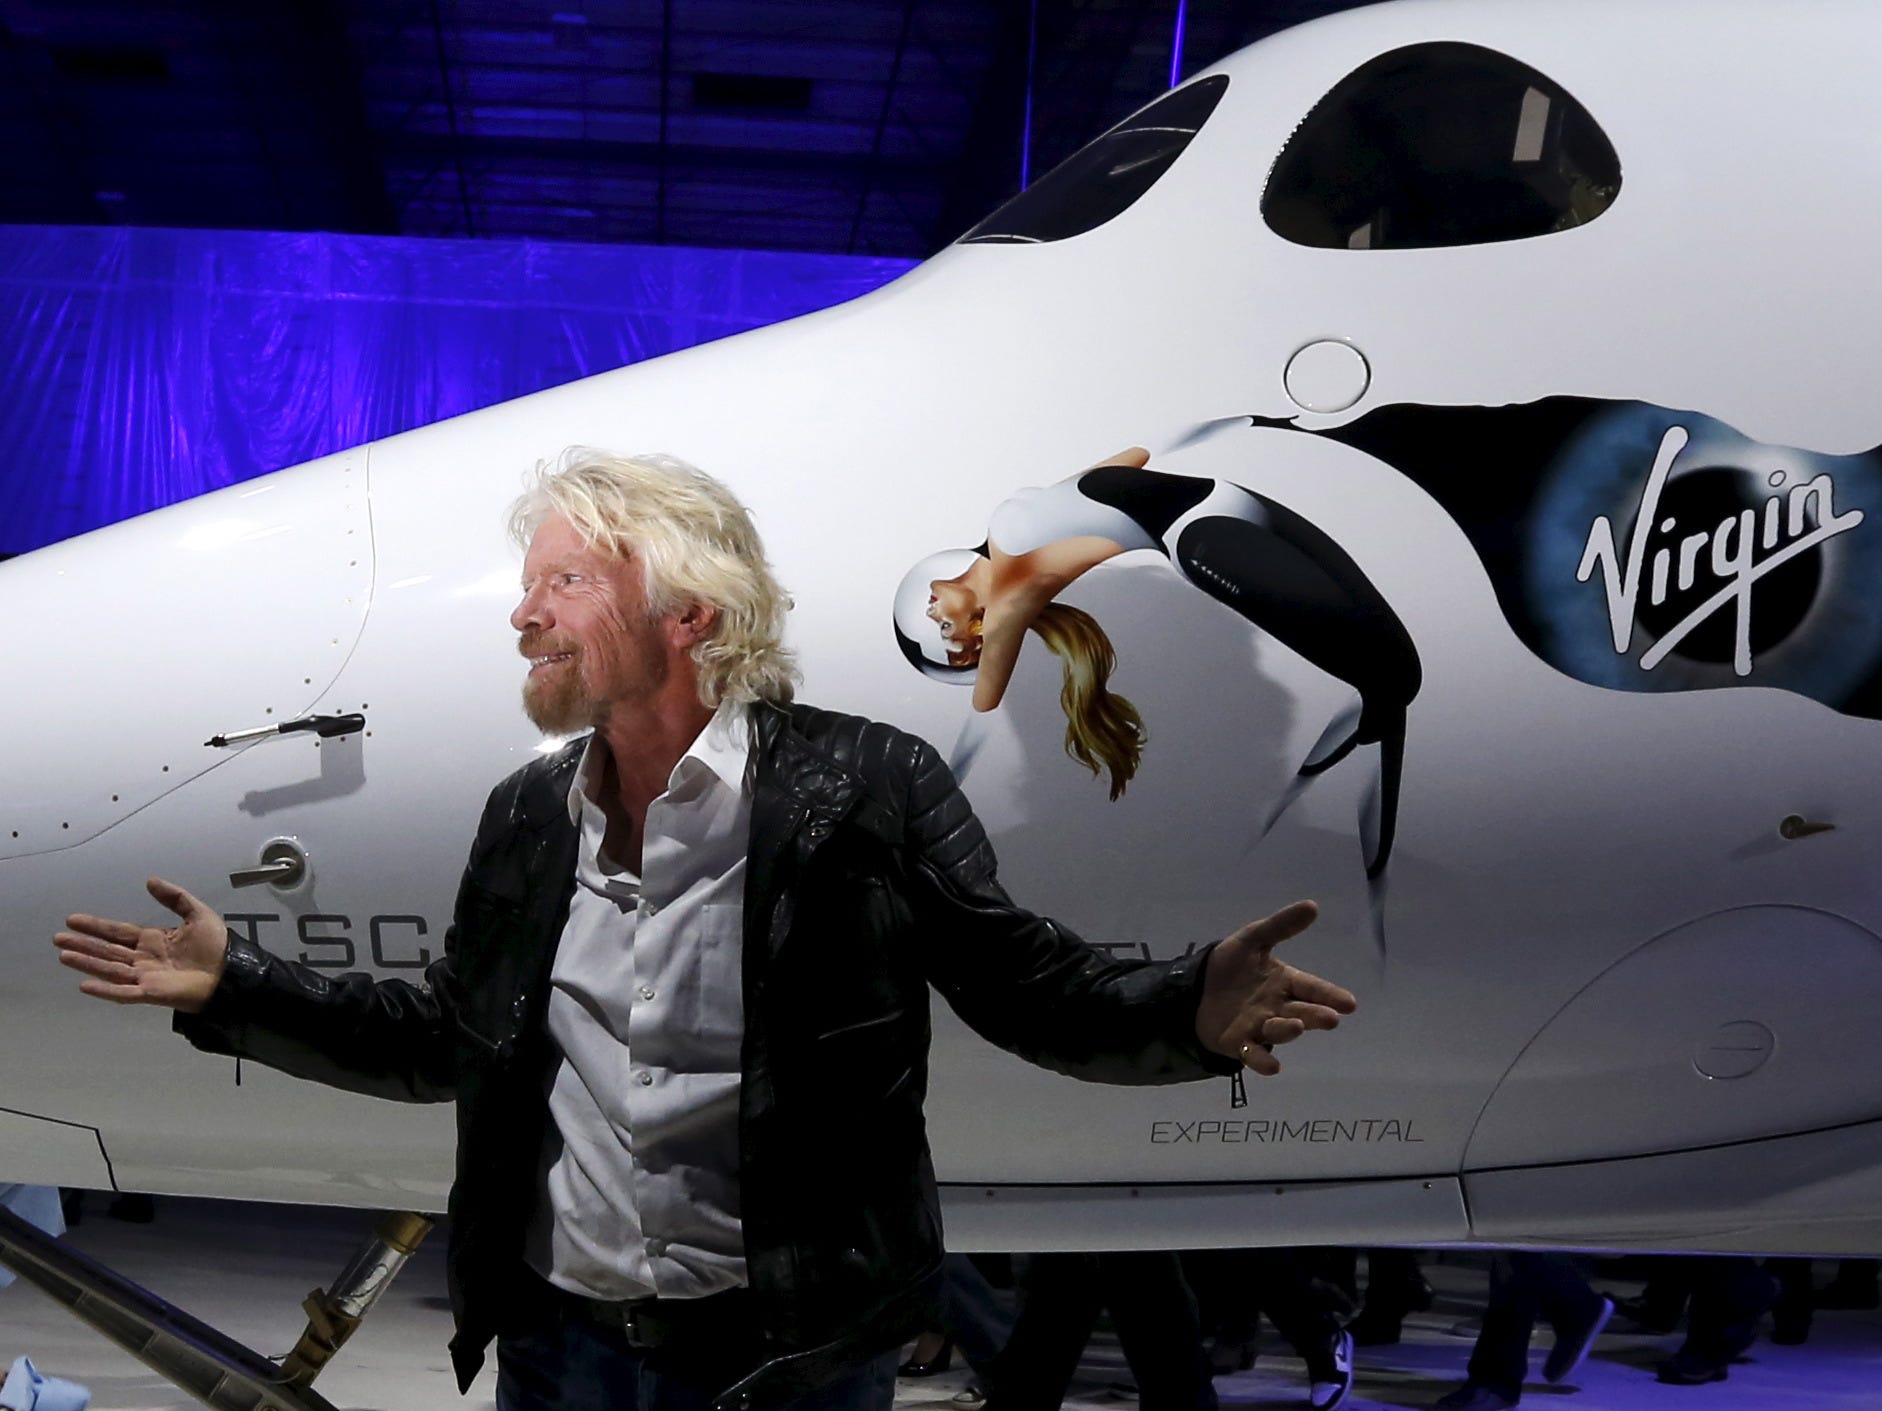 richard branson with spaceshiptwo space plane